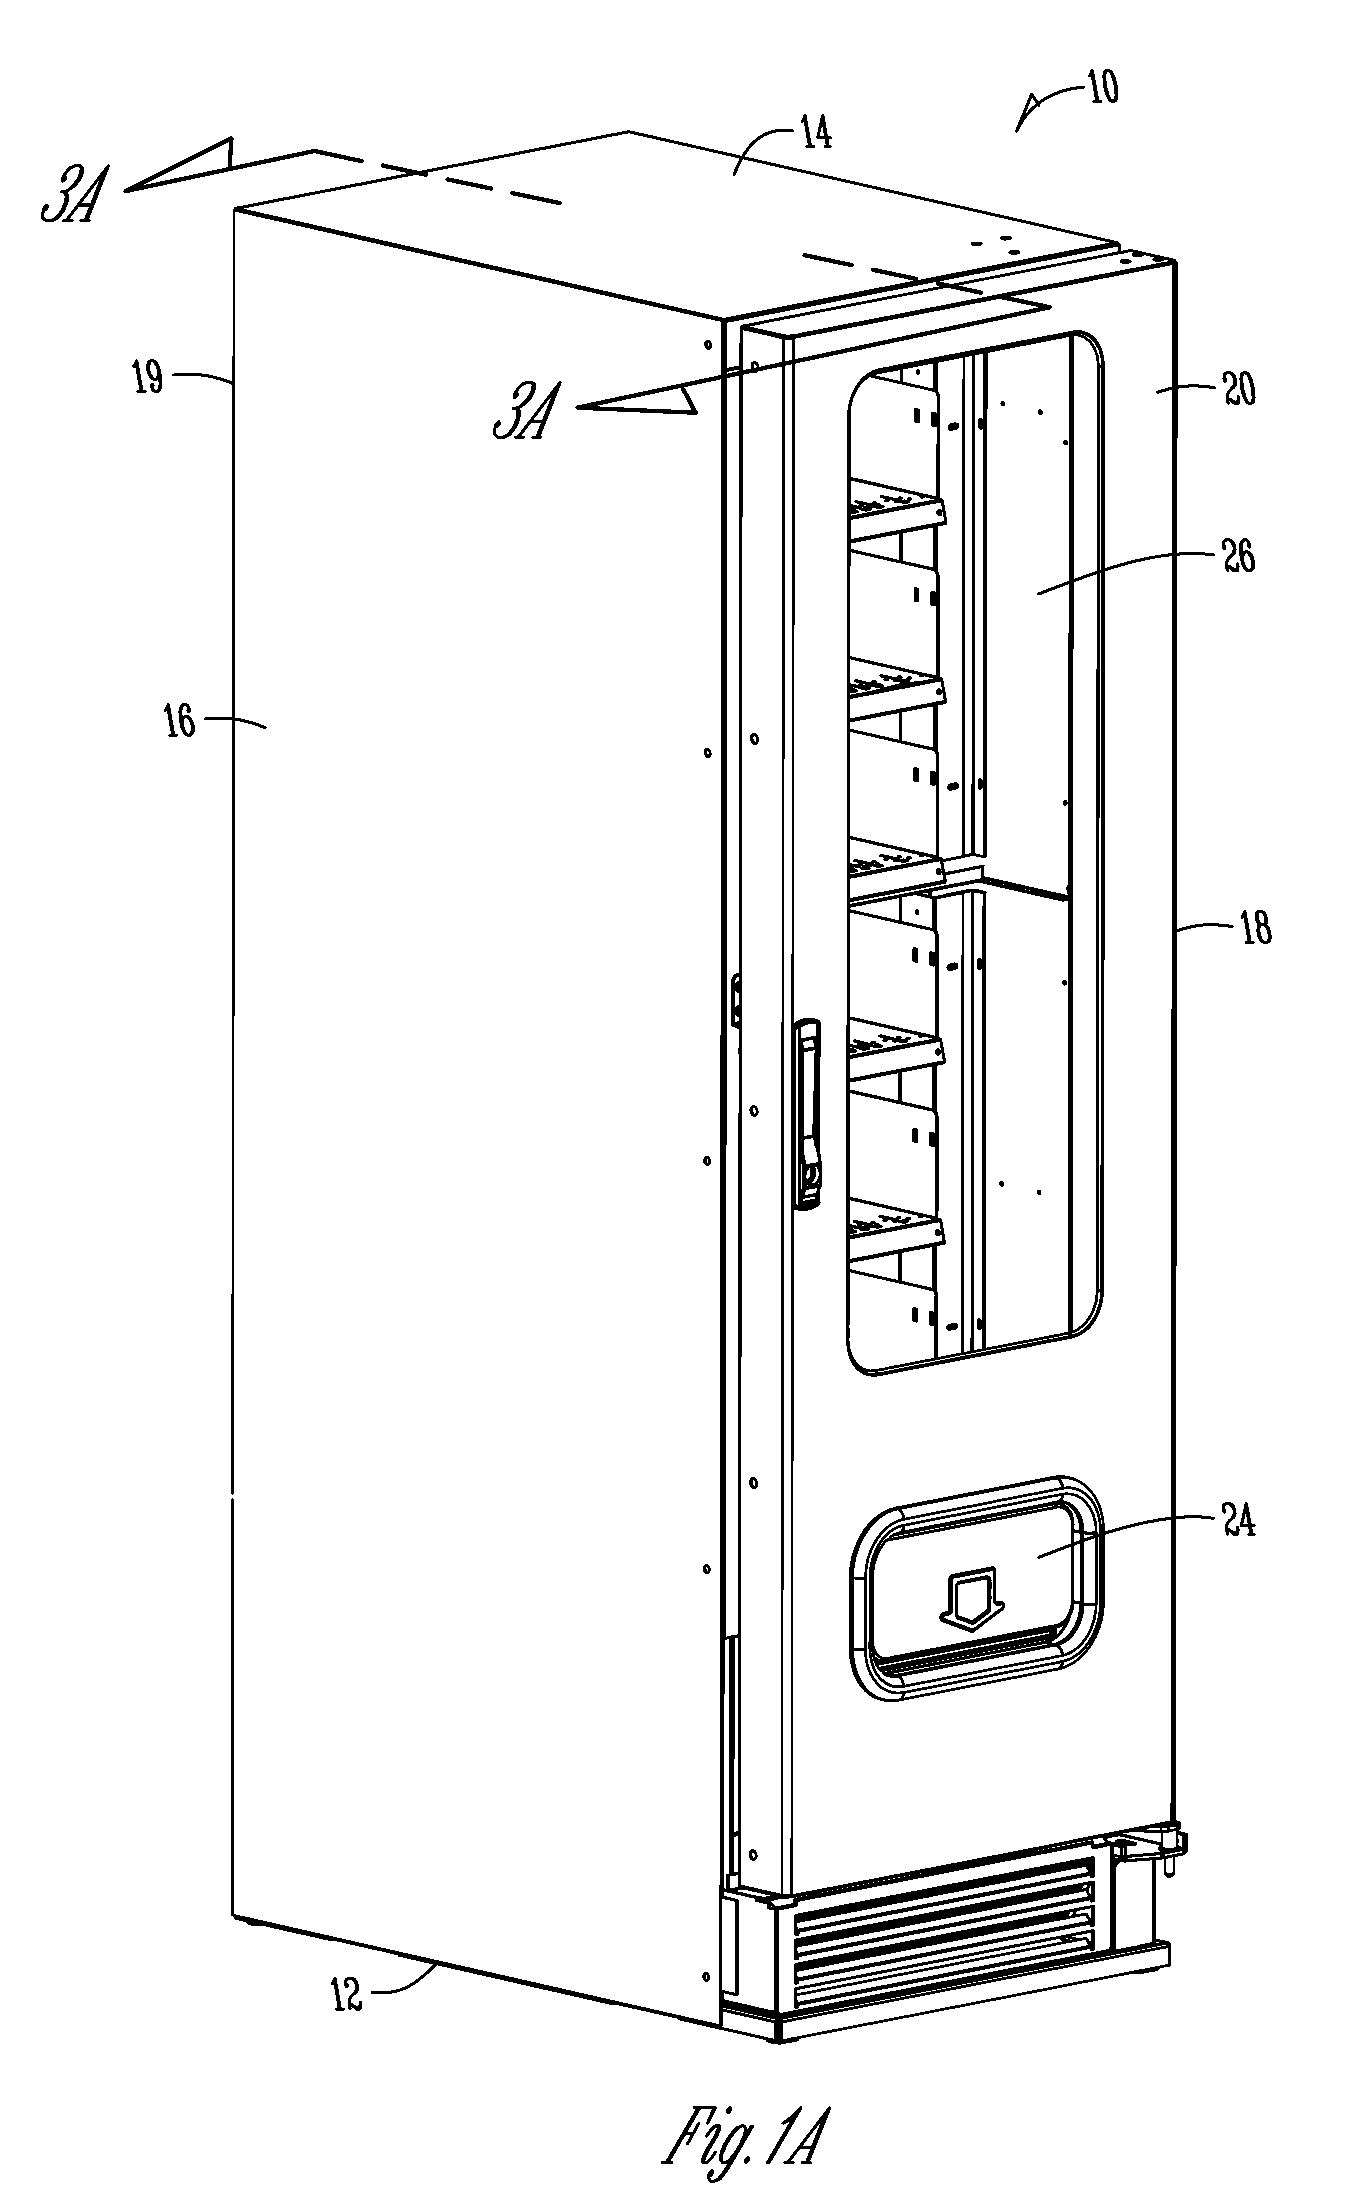 Apparatus and method for single or multiple temperature zone(s) in refrigerated vending machine